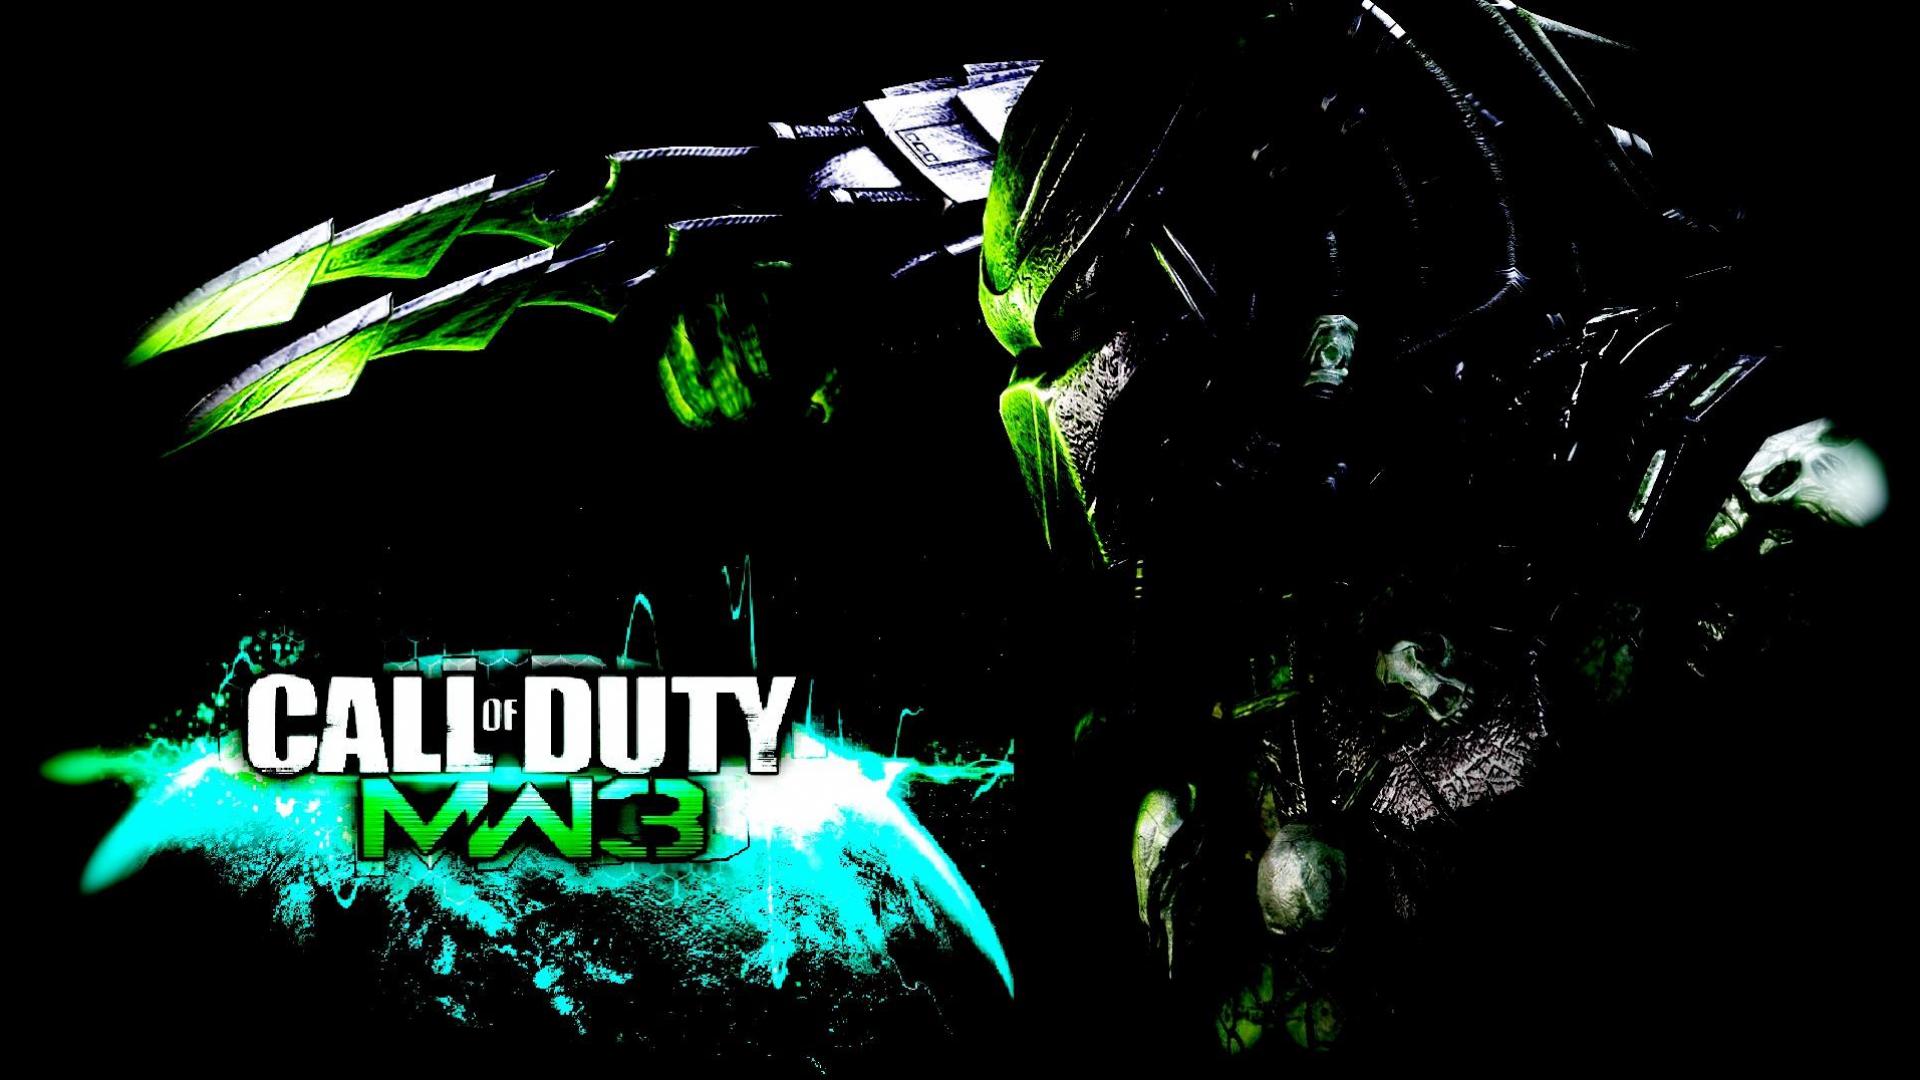 CALL OF DUTY MW3 WALLPAPER - (#75628) - HD Wallpapers ...